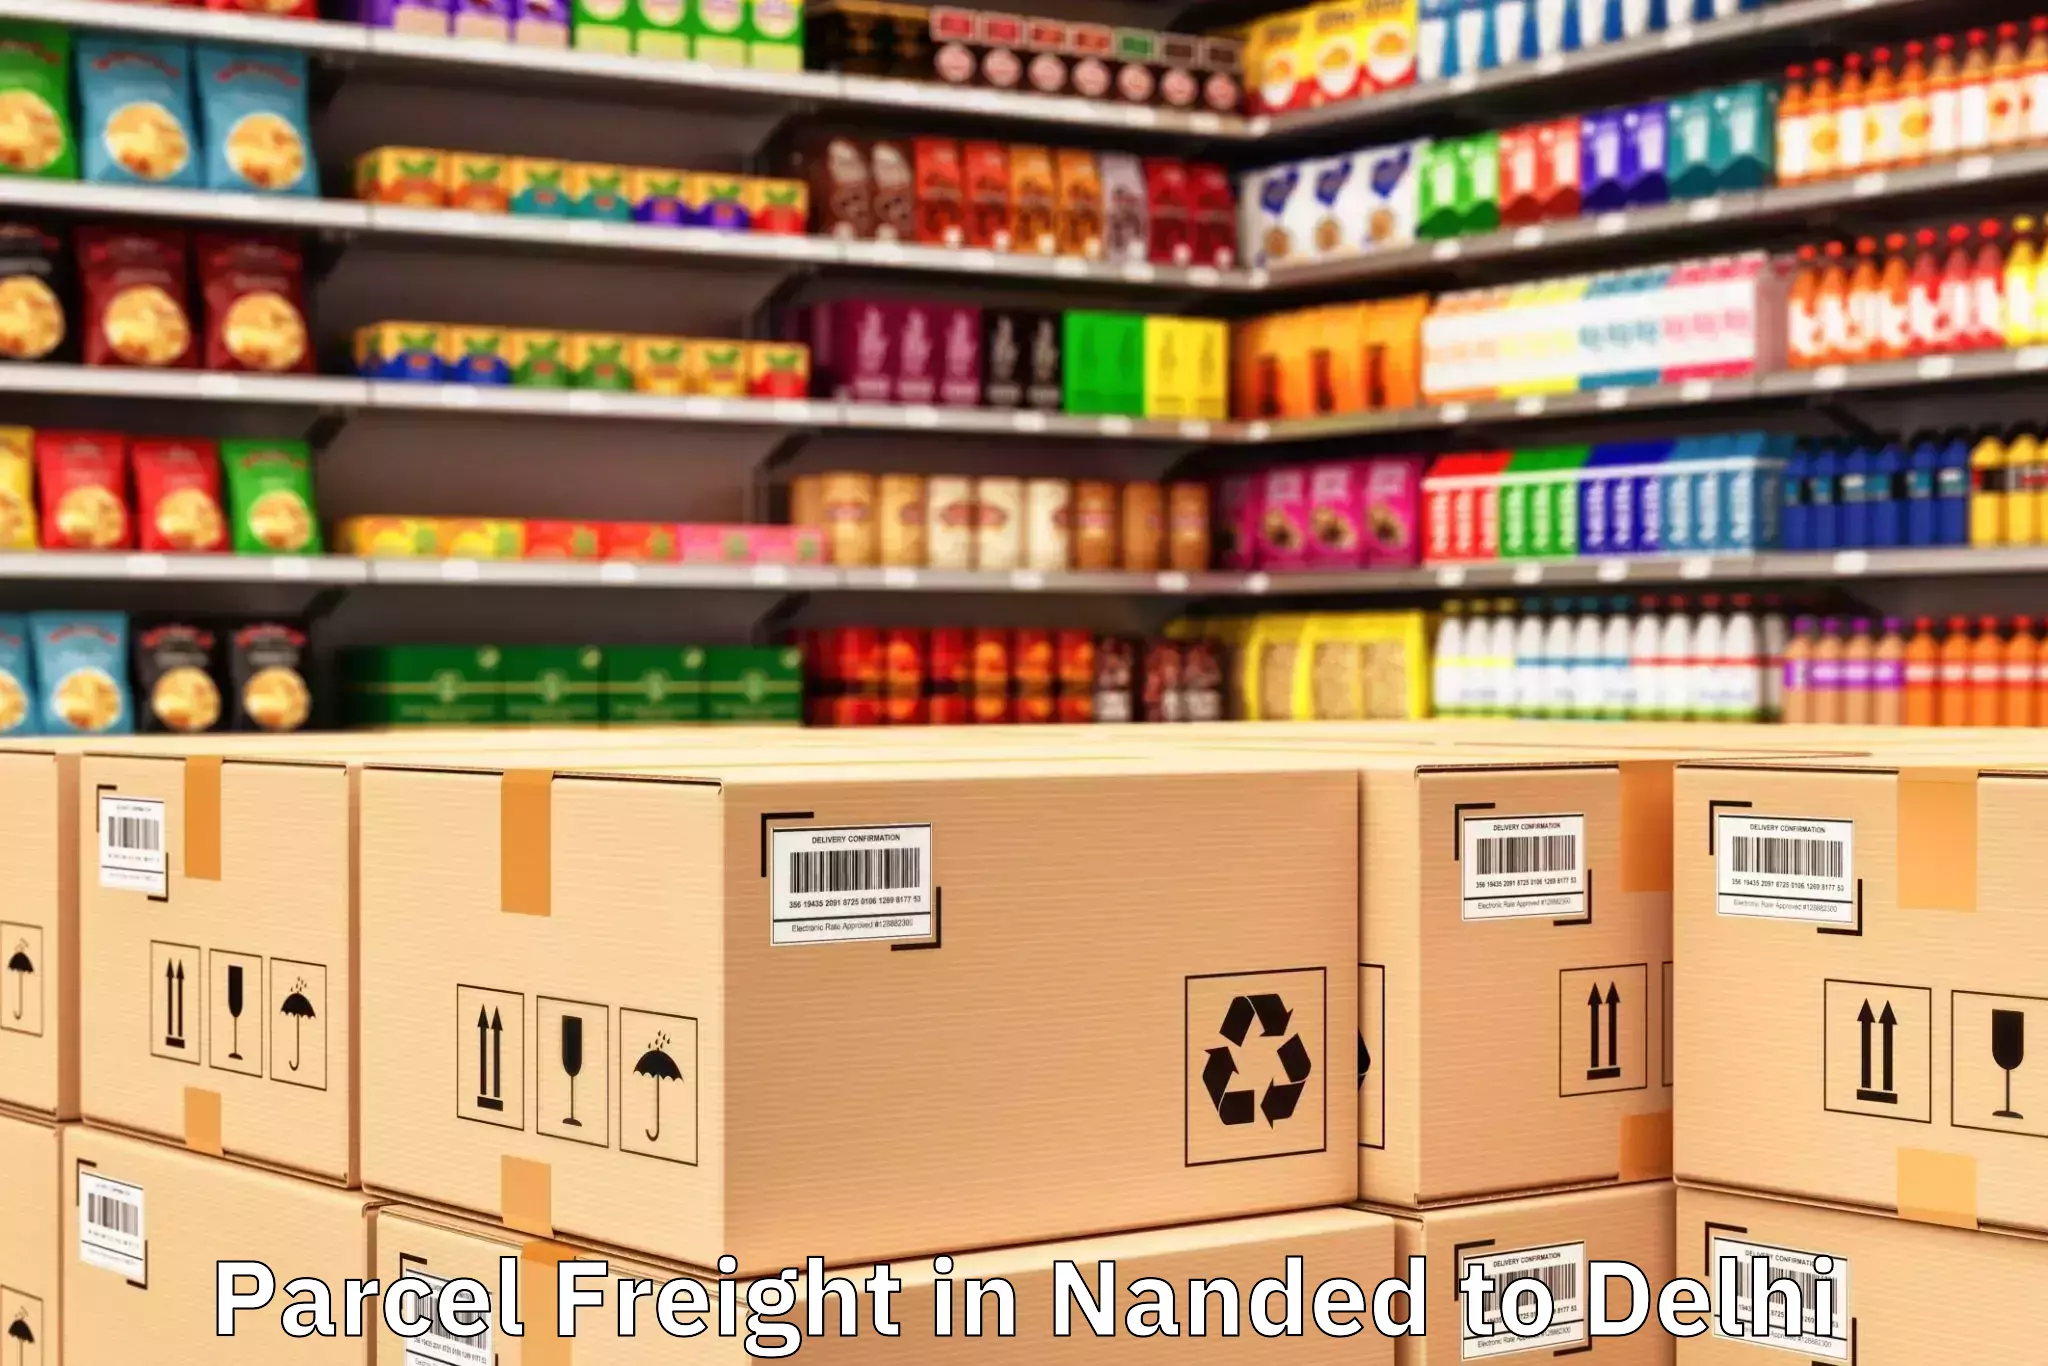 Professional Nanded to Okhla Industrial Estate Okhla Parcel Freight